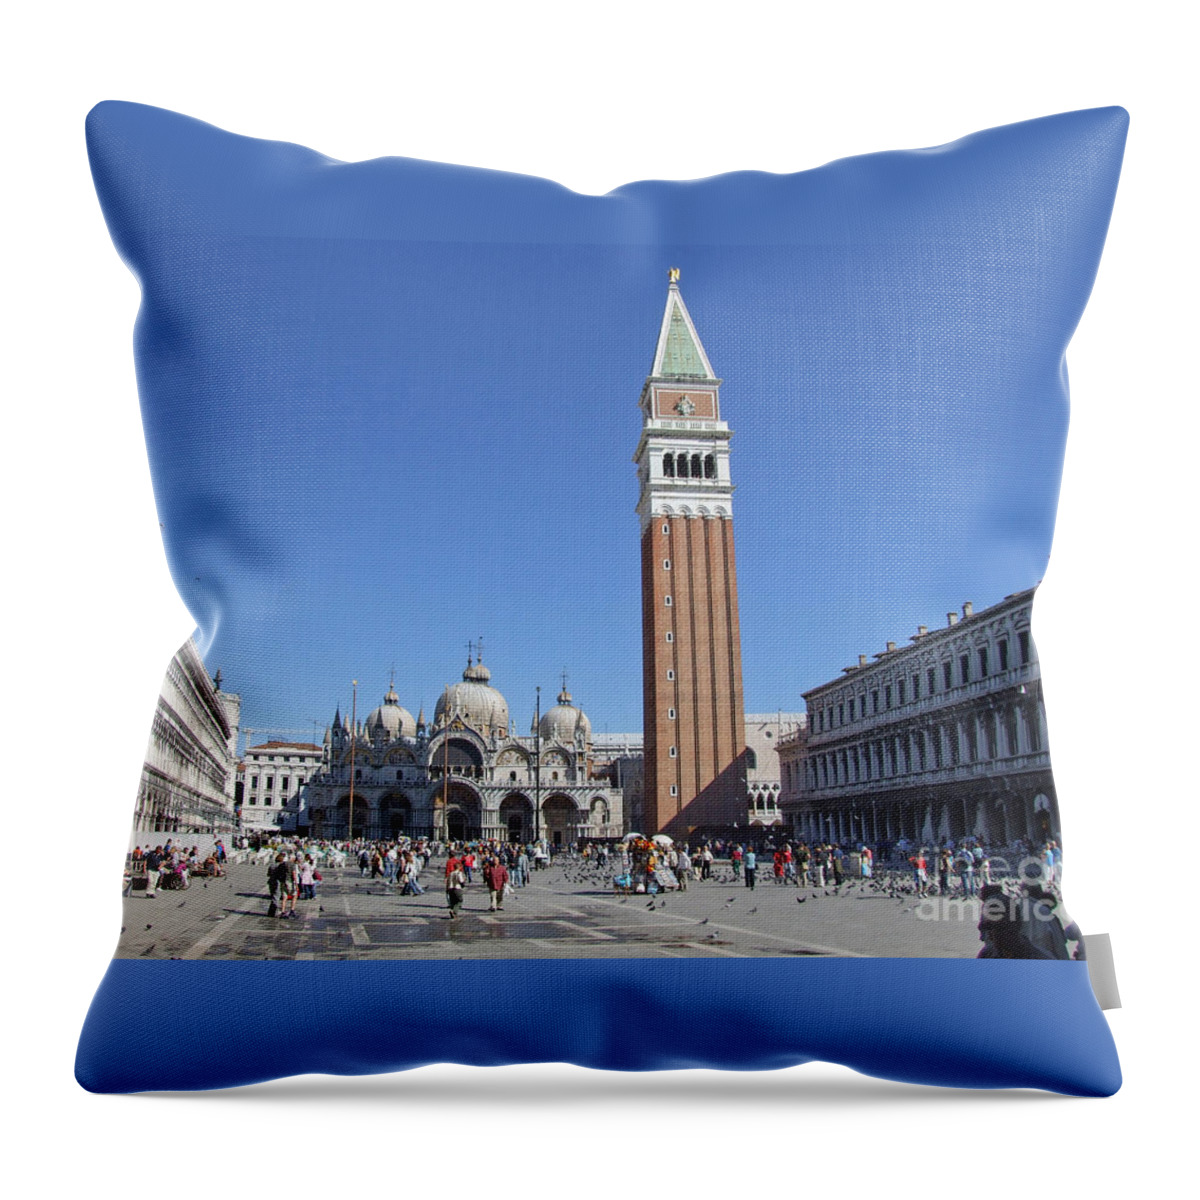 St. Marks Square Throw Pillow featuring the photograph St. Marks Square - Venice by Phil Banks